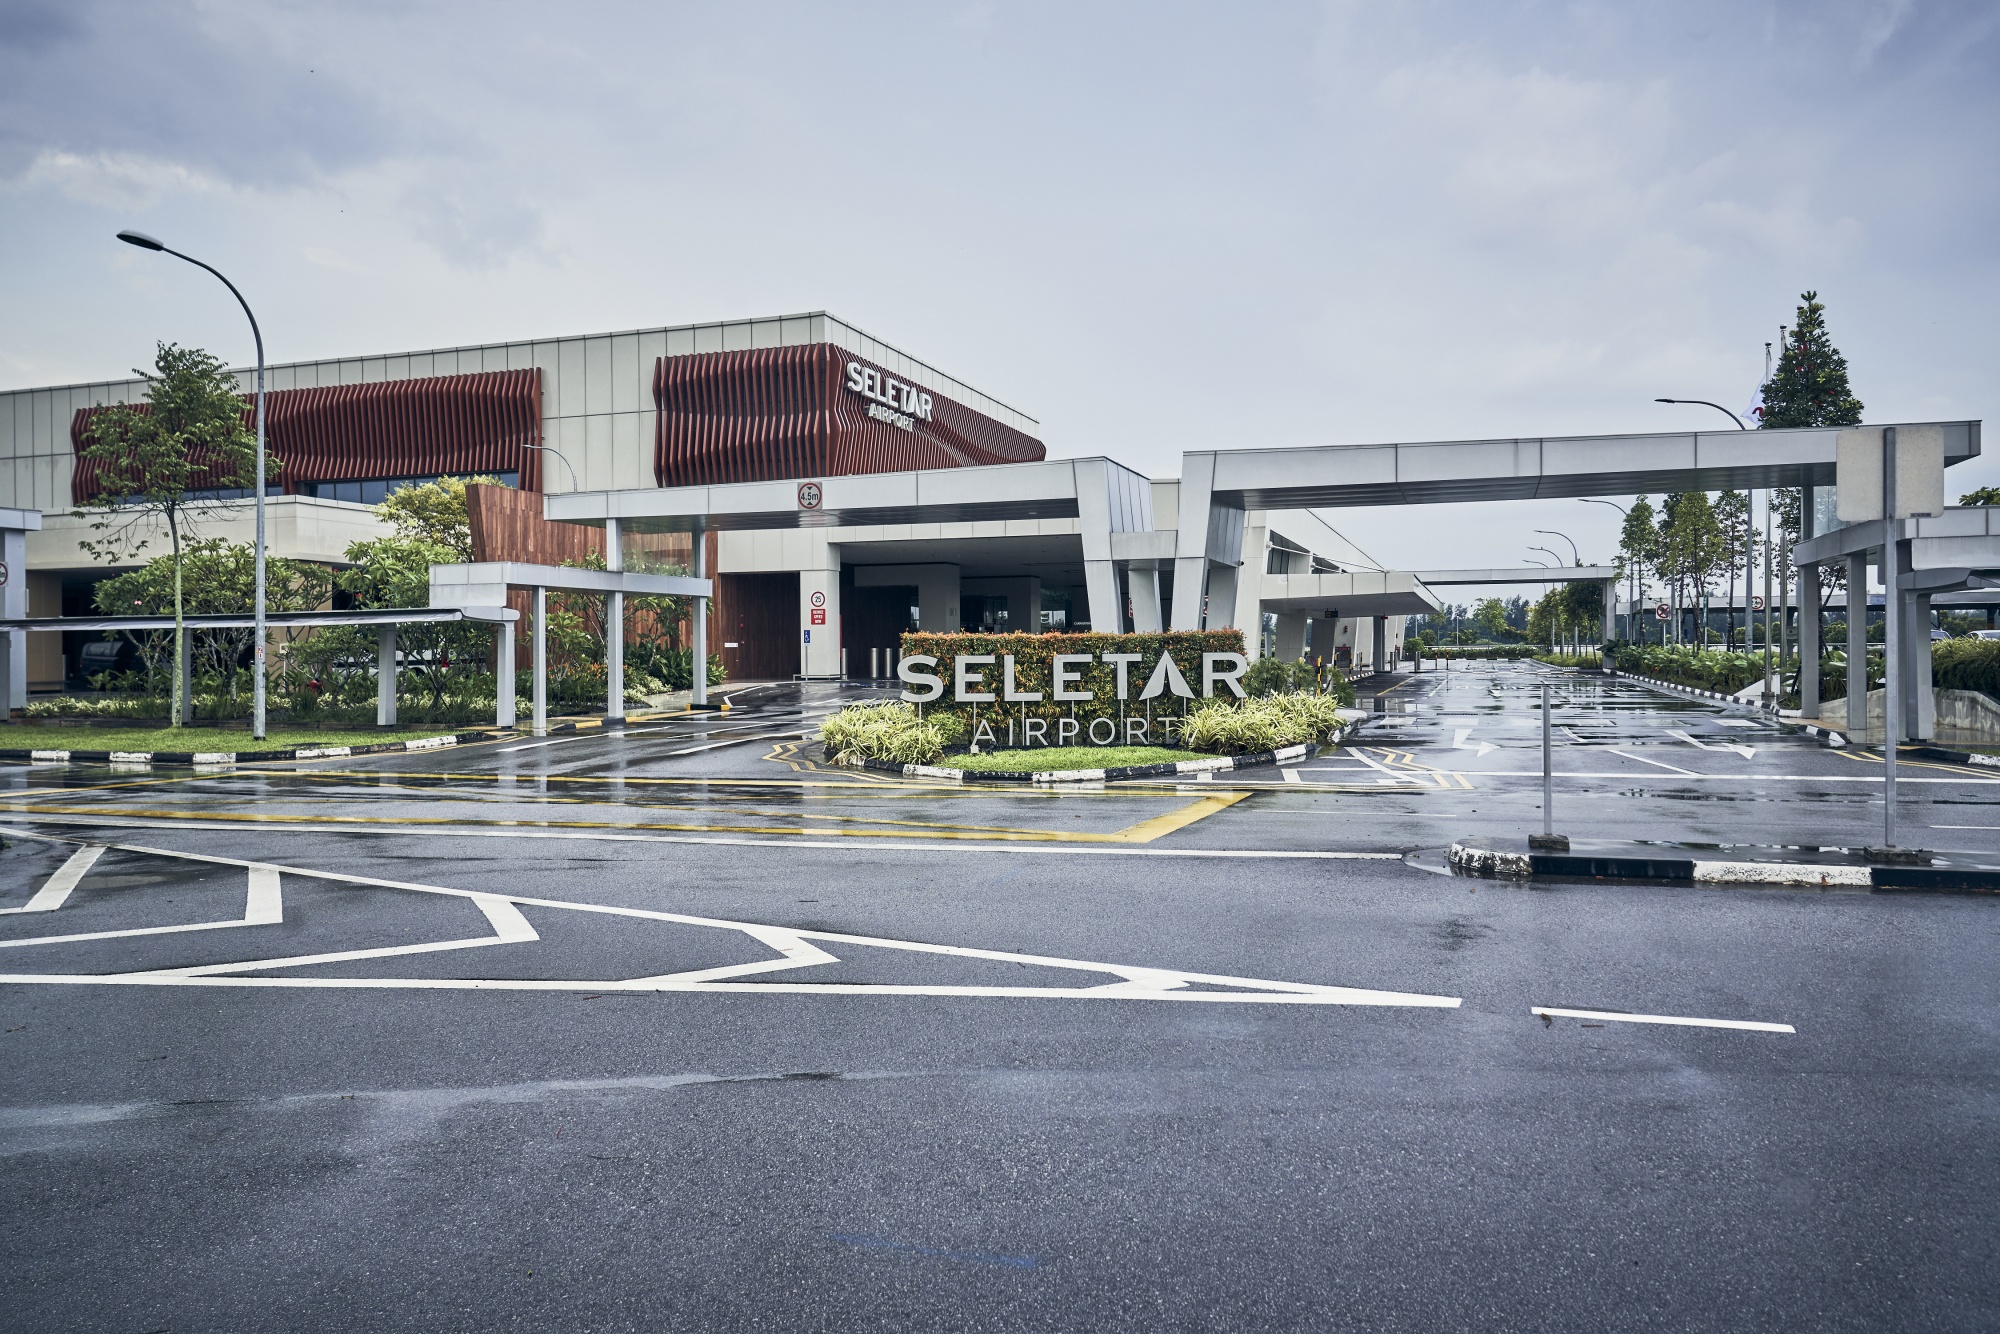 Singapore Changi Rebounds Strongly, Targets New Southeast Asia Connections